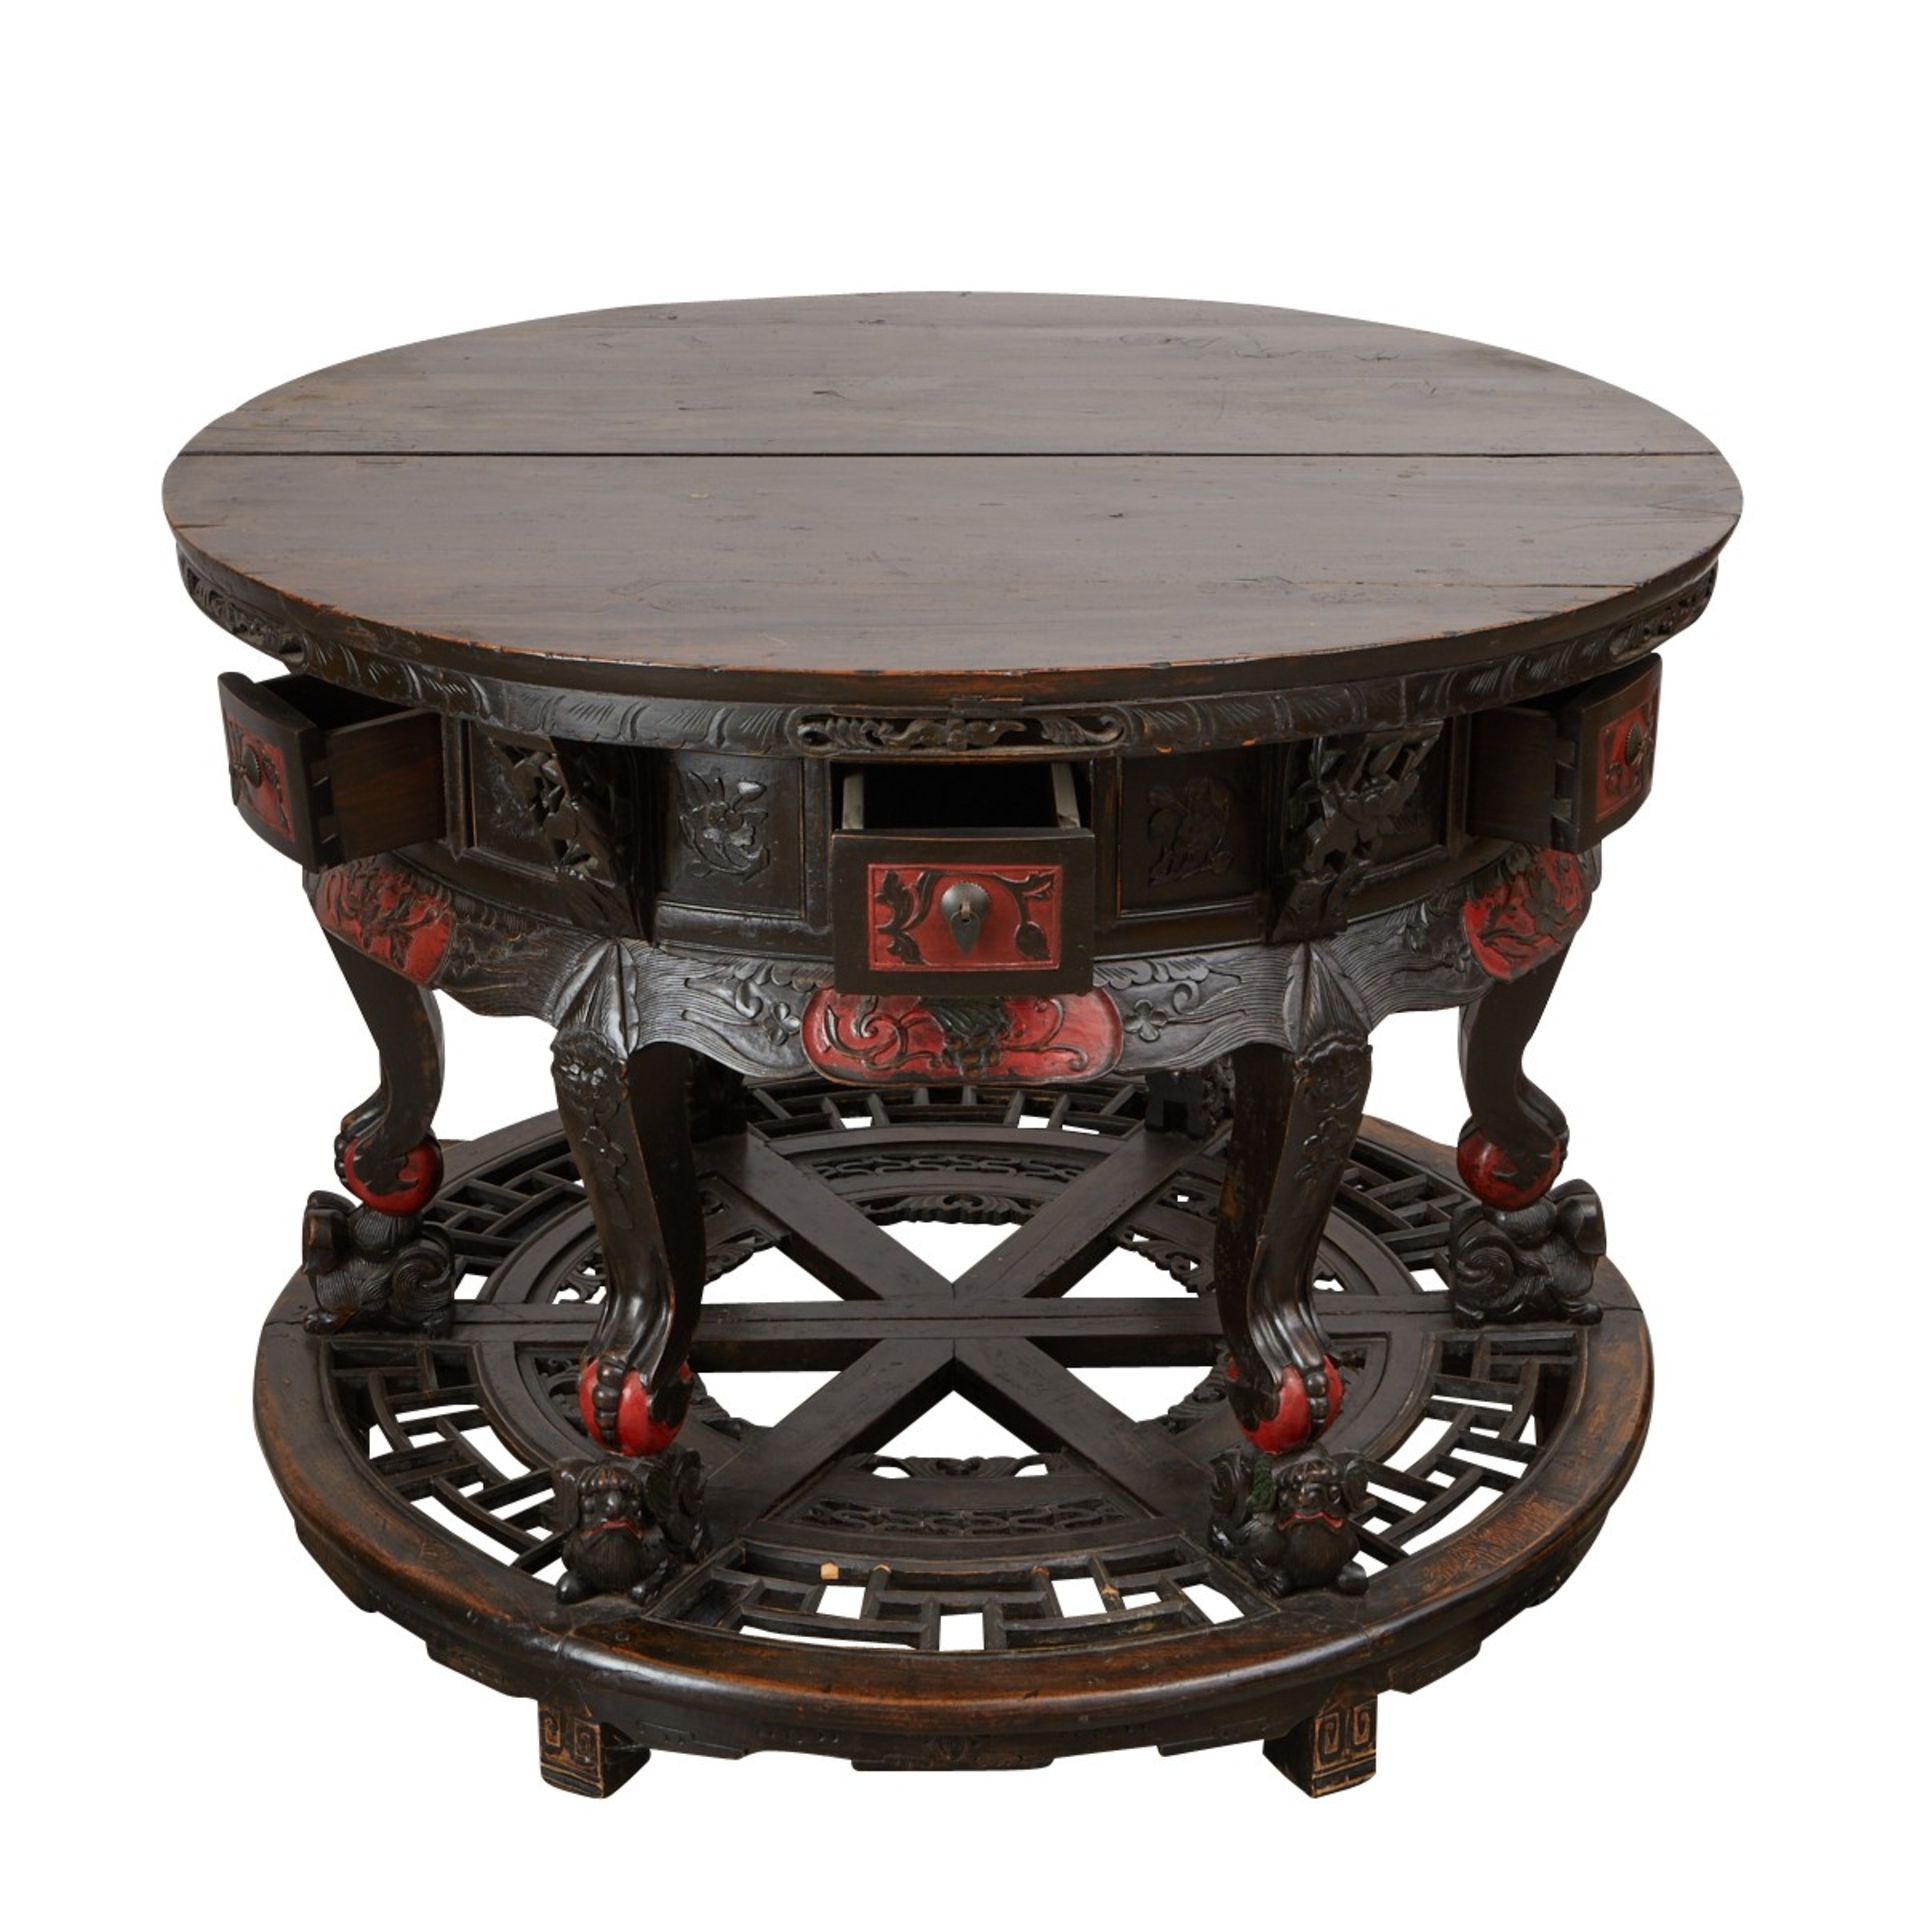 Chinese Round Carved Wood Table w/ Drawers 19th c. - Image 3 of 11